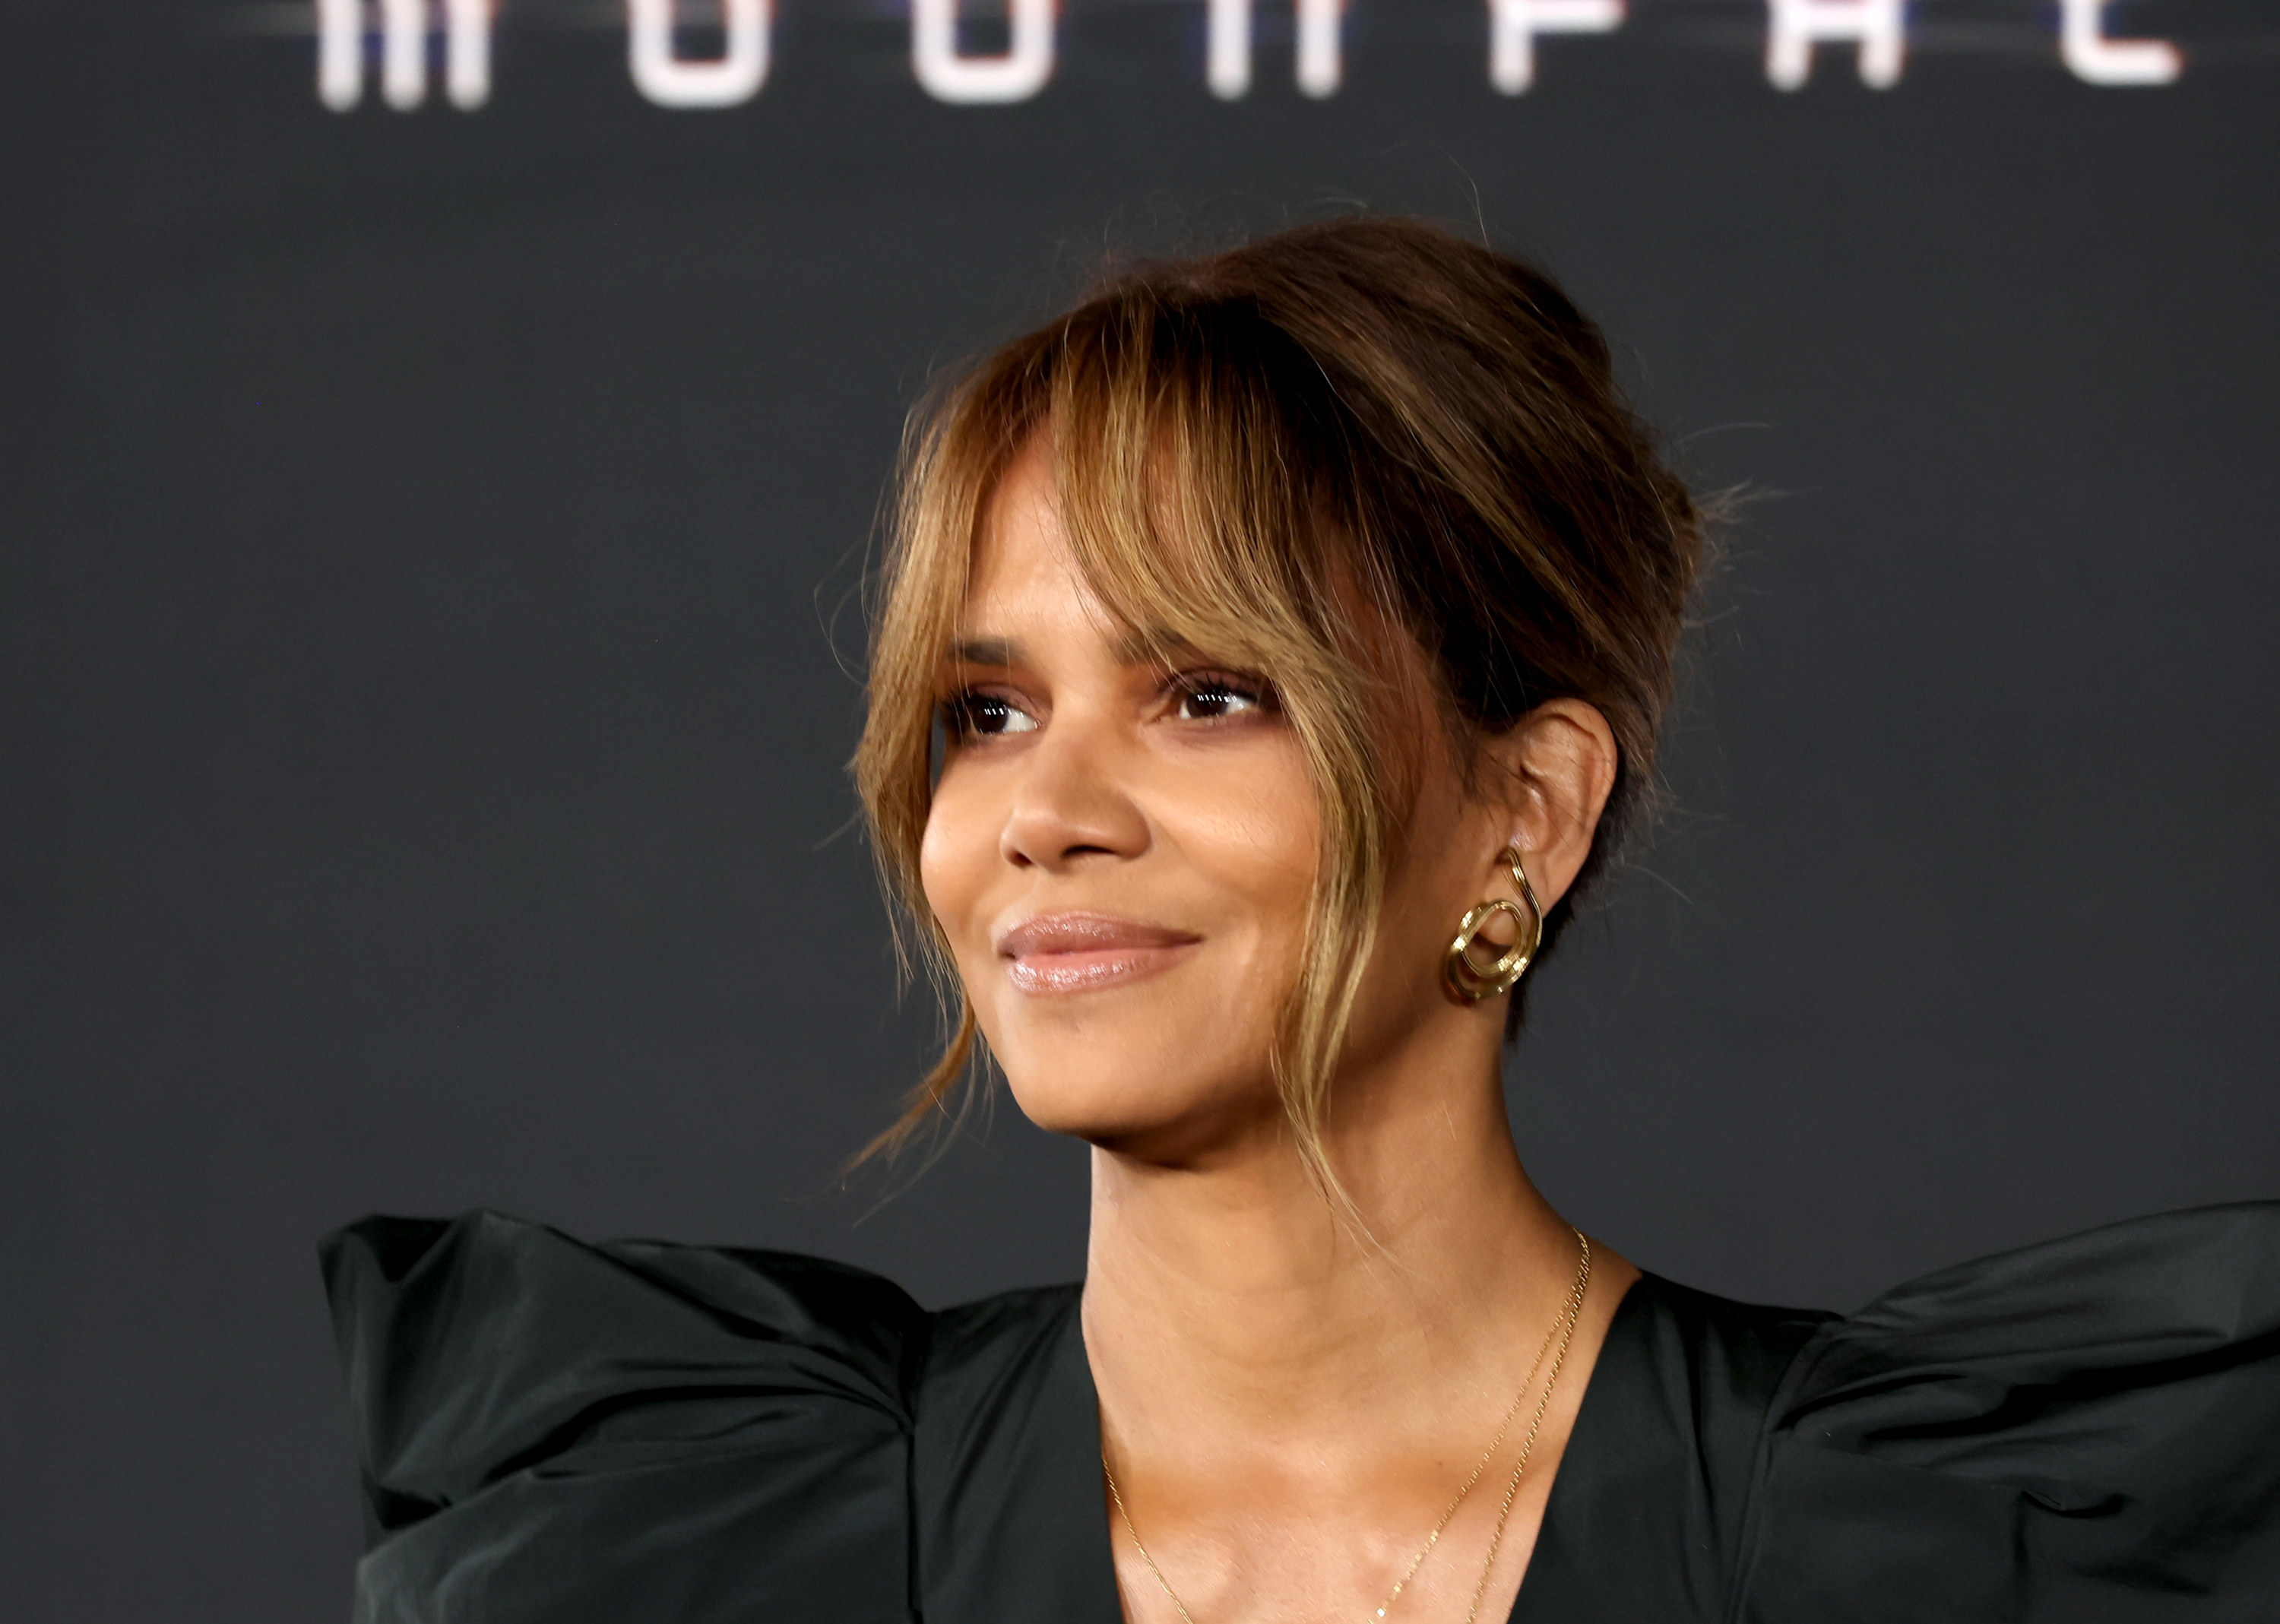 Halle Berry at a movie premiere